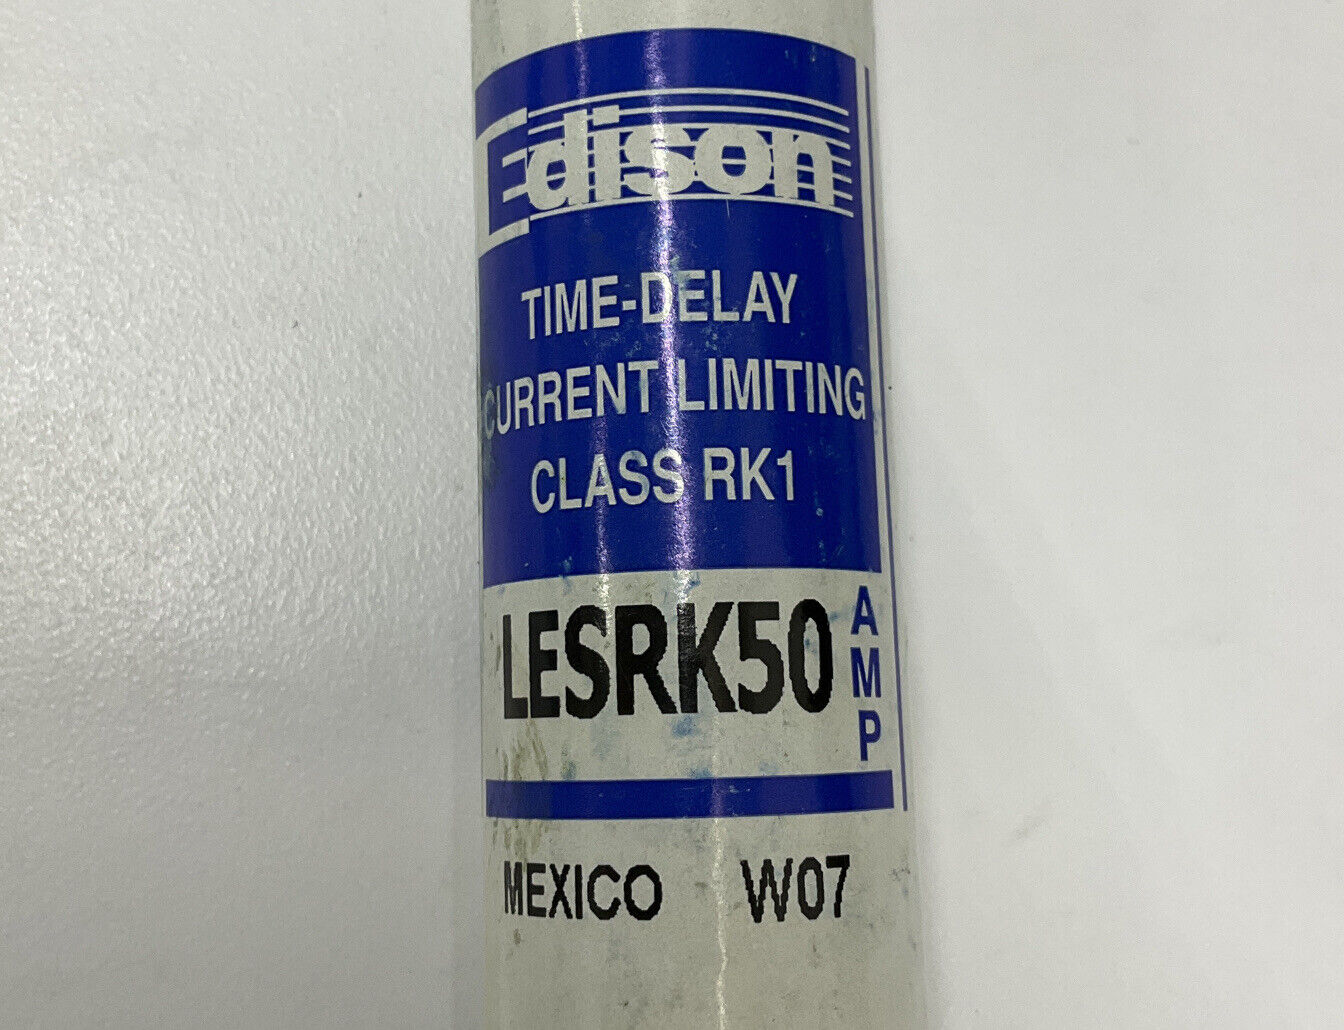 Edison Time-Delay Current Limiting RK1 LESK50 (CL115) - 0